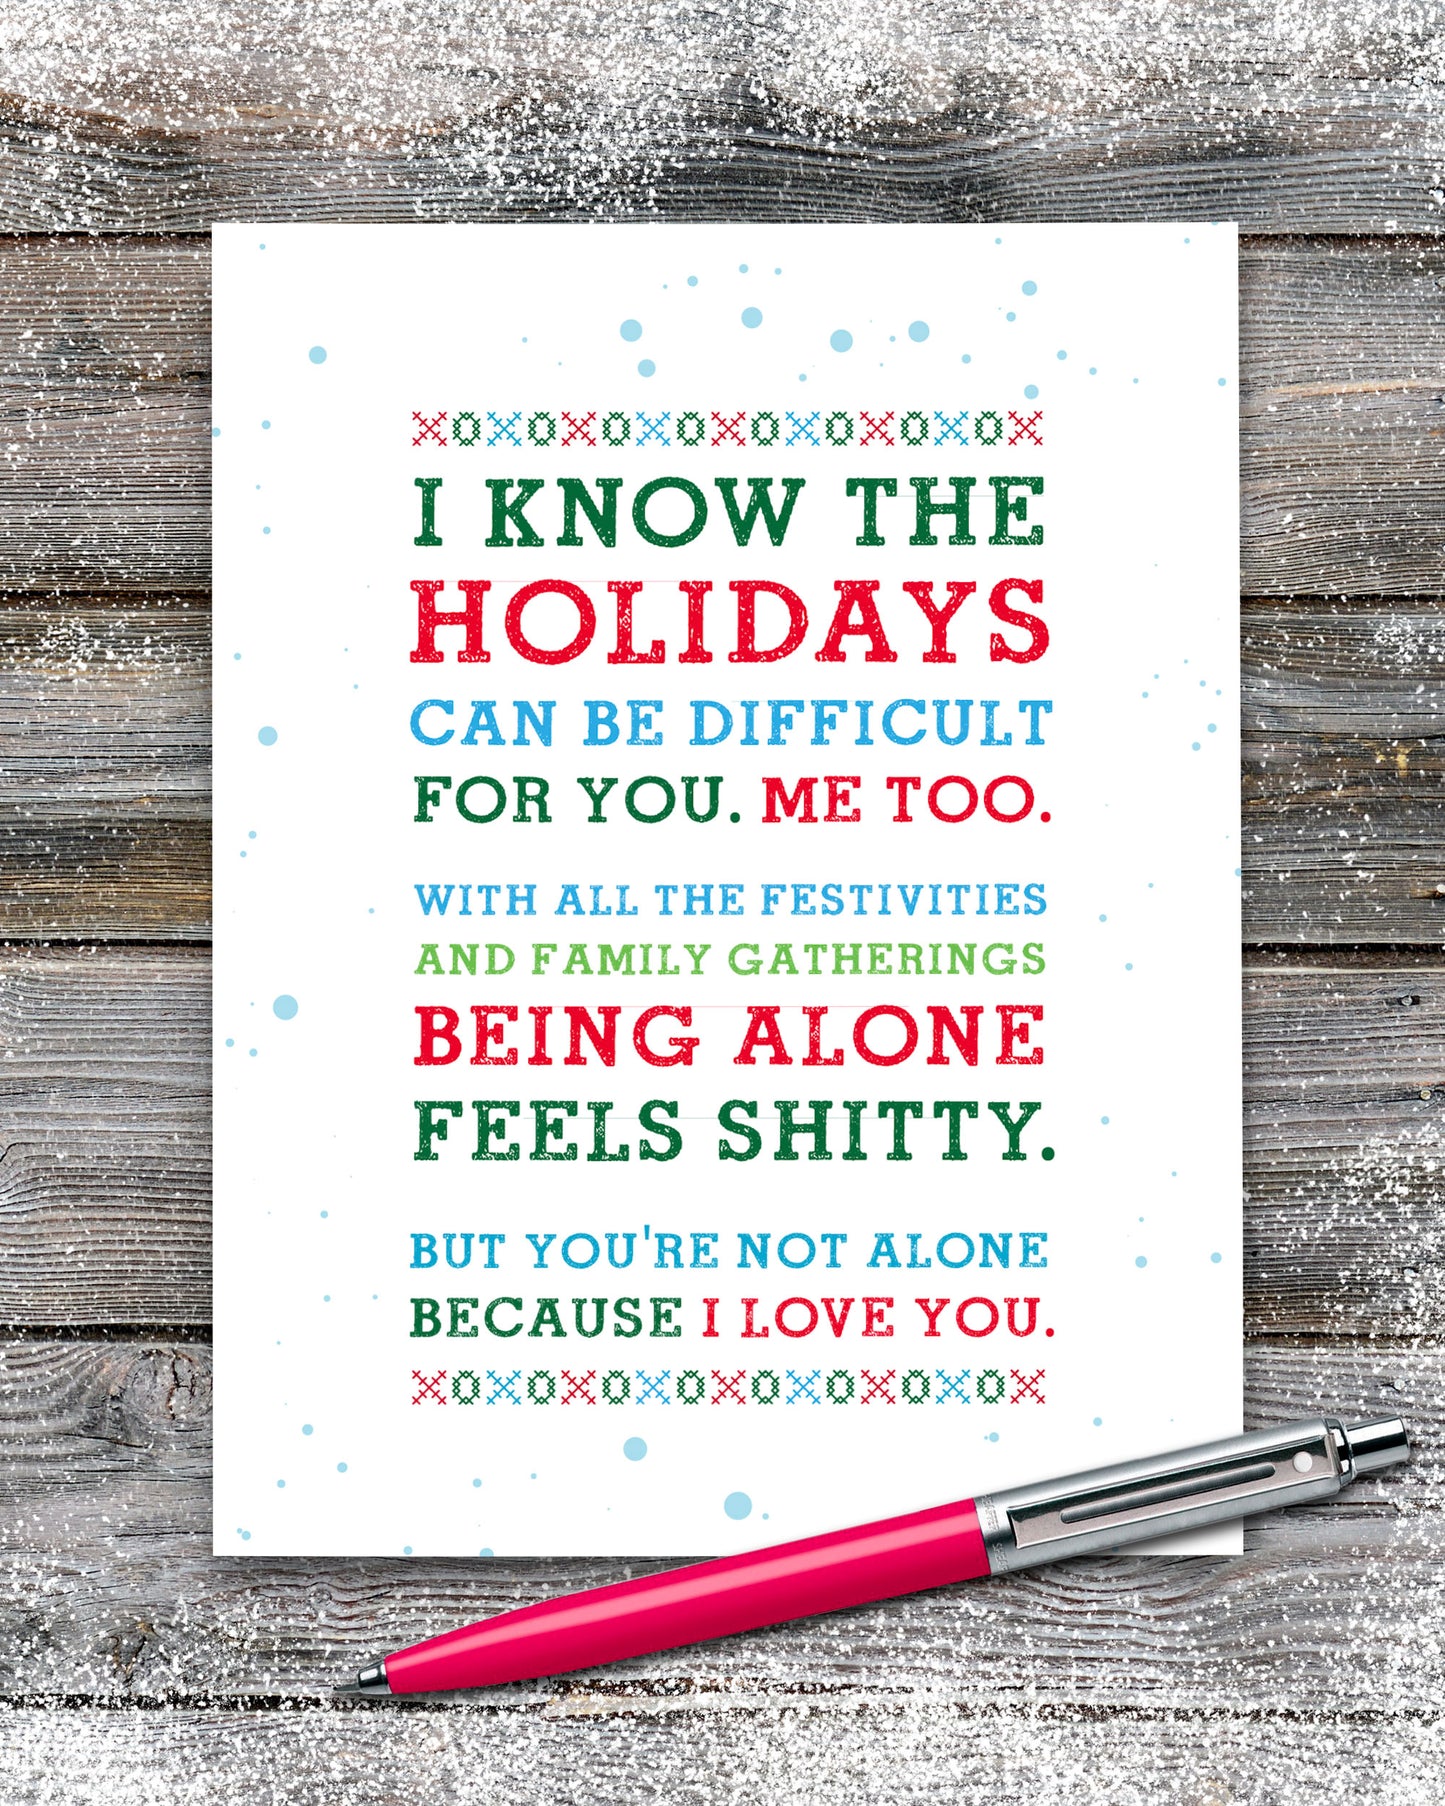 I know the holidays can be difficult encouraging Christmas Card with red pen.